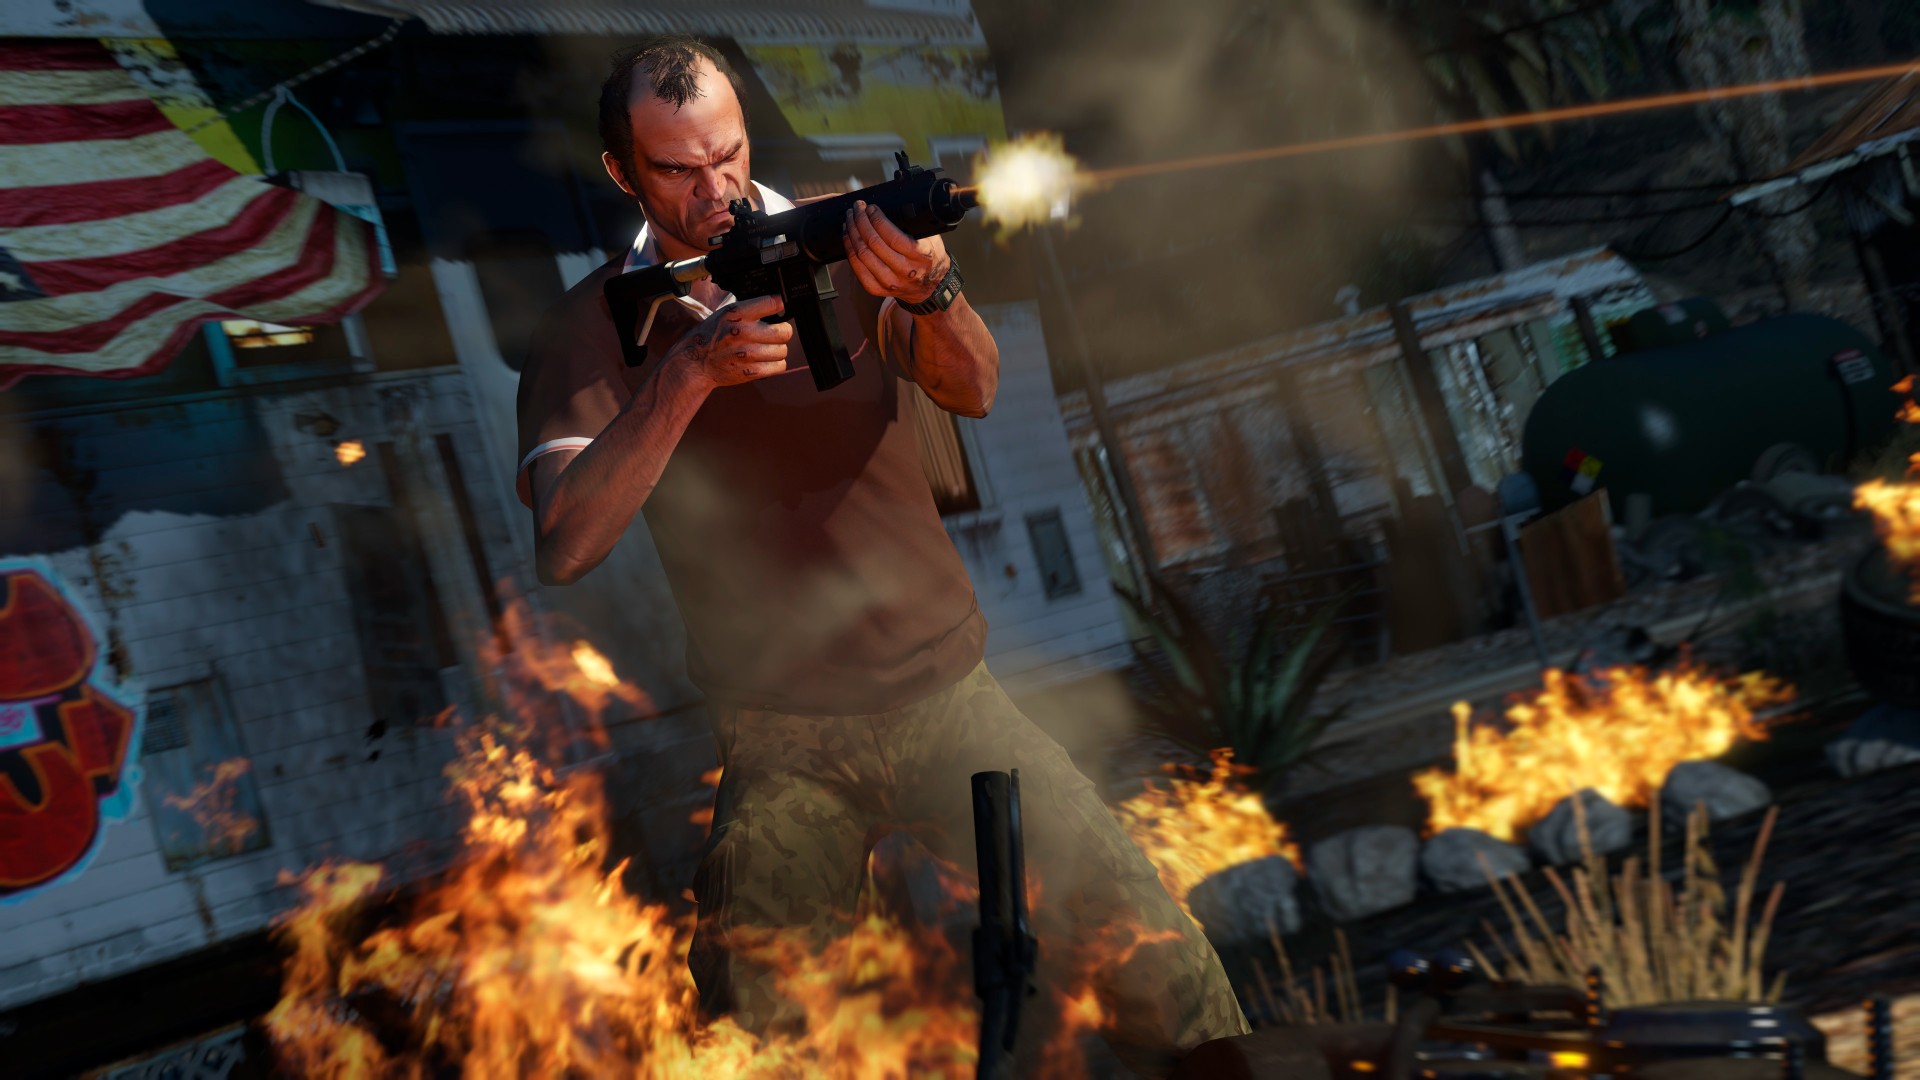 GTA 6 should feel like GTA 4 and Red Dead Redemption 2, not GTA 5: GTA 5's Trevor is on fire and firing his machine gun